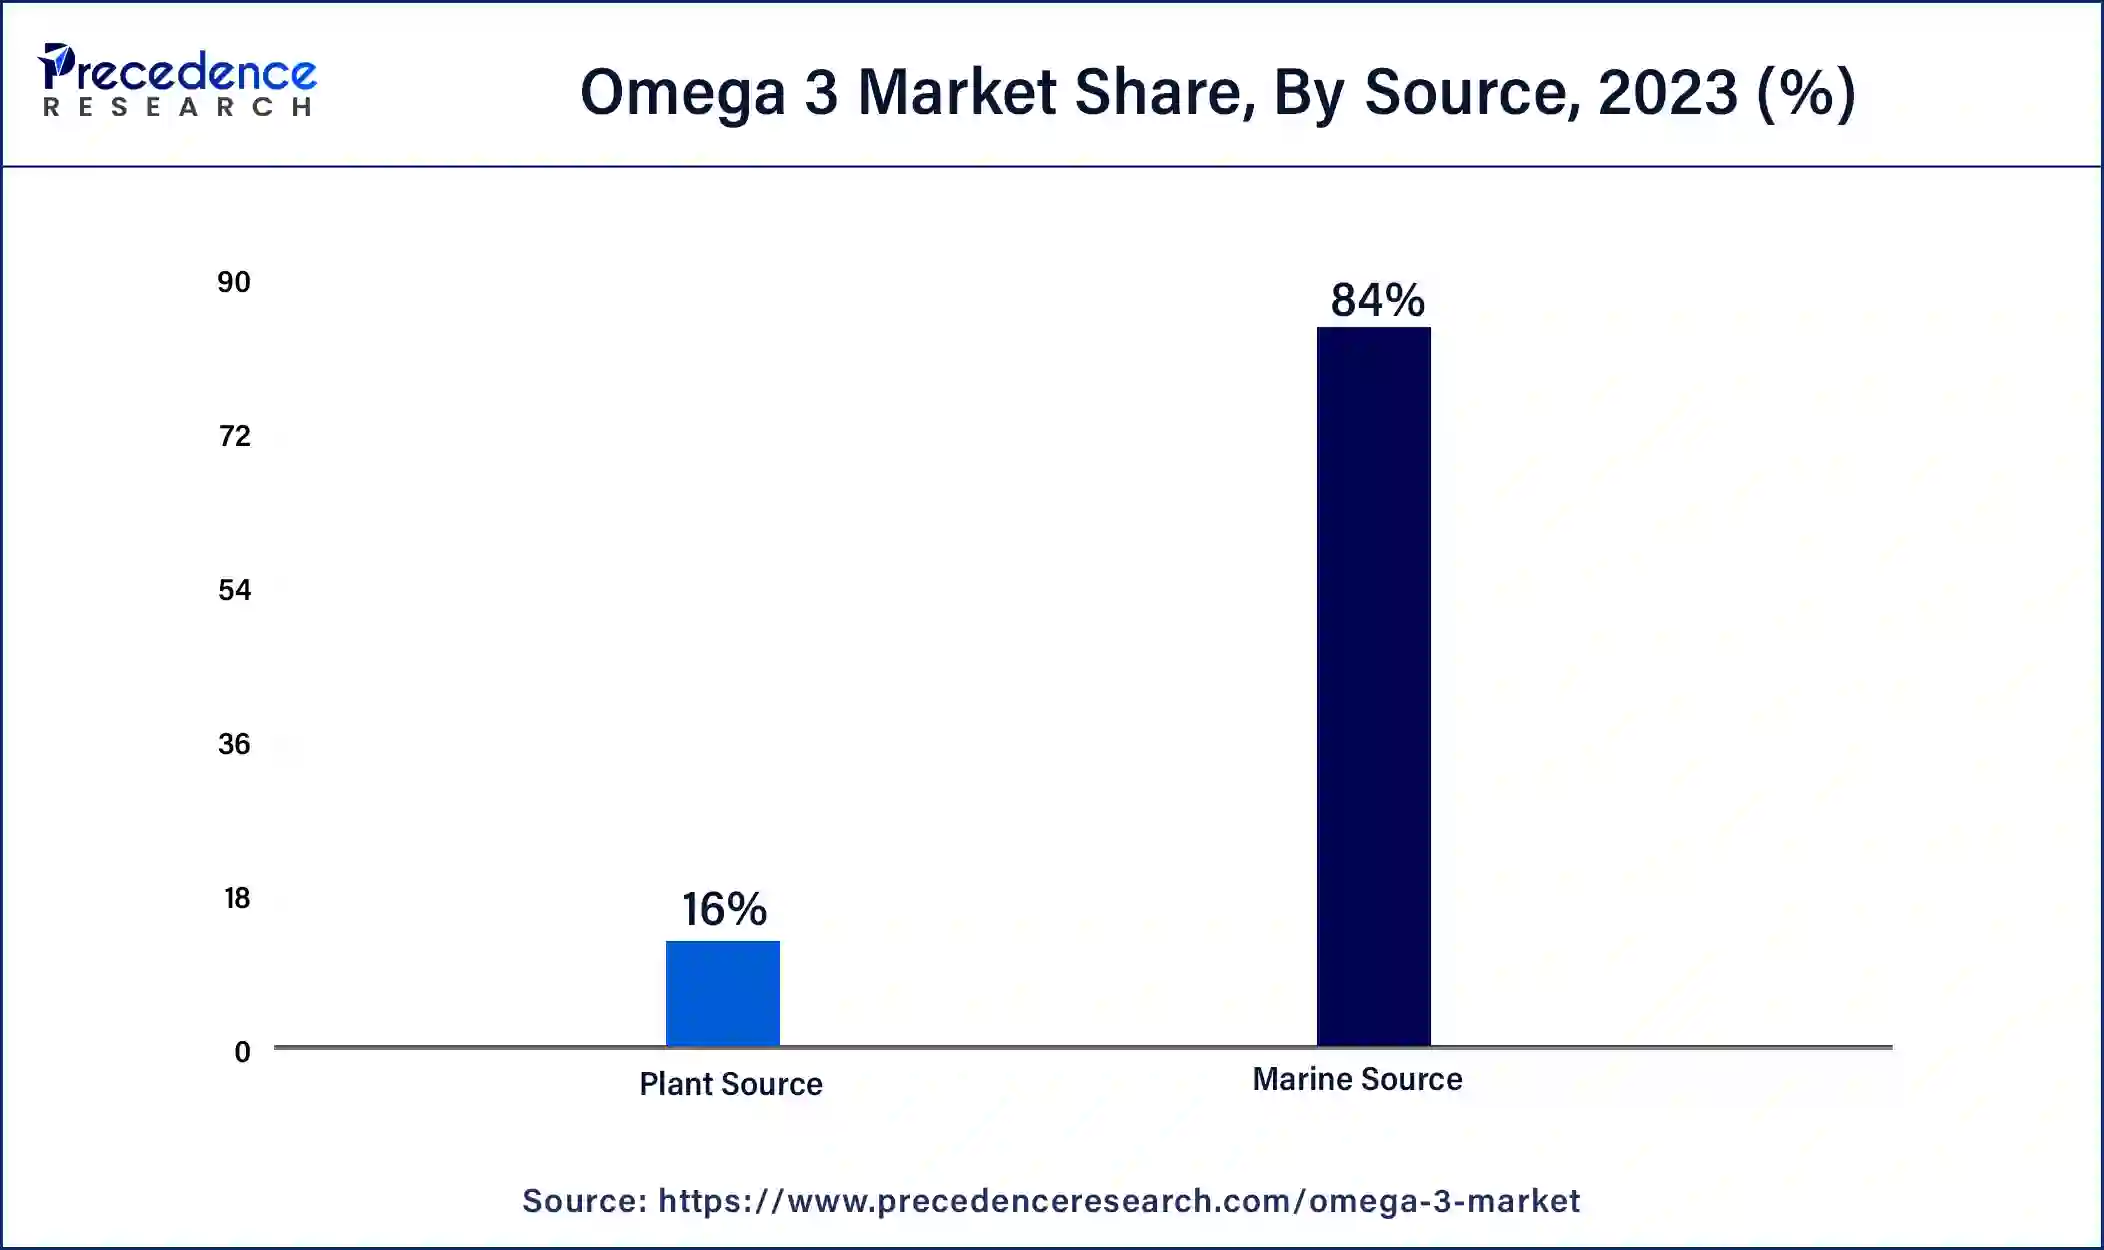 Omega 3 Market Share, By Source, 2023 (%)